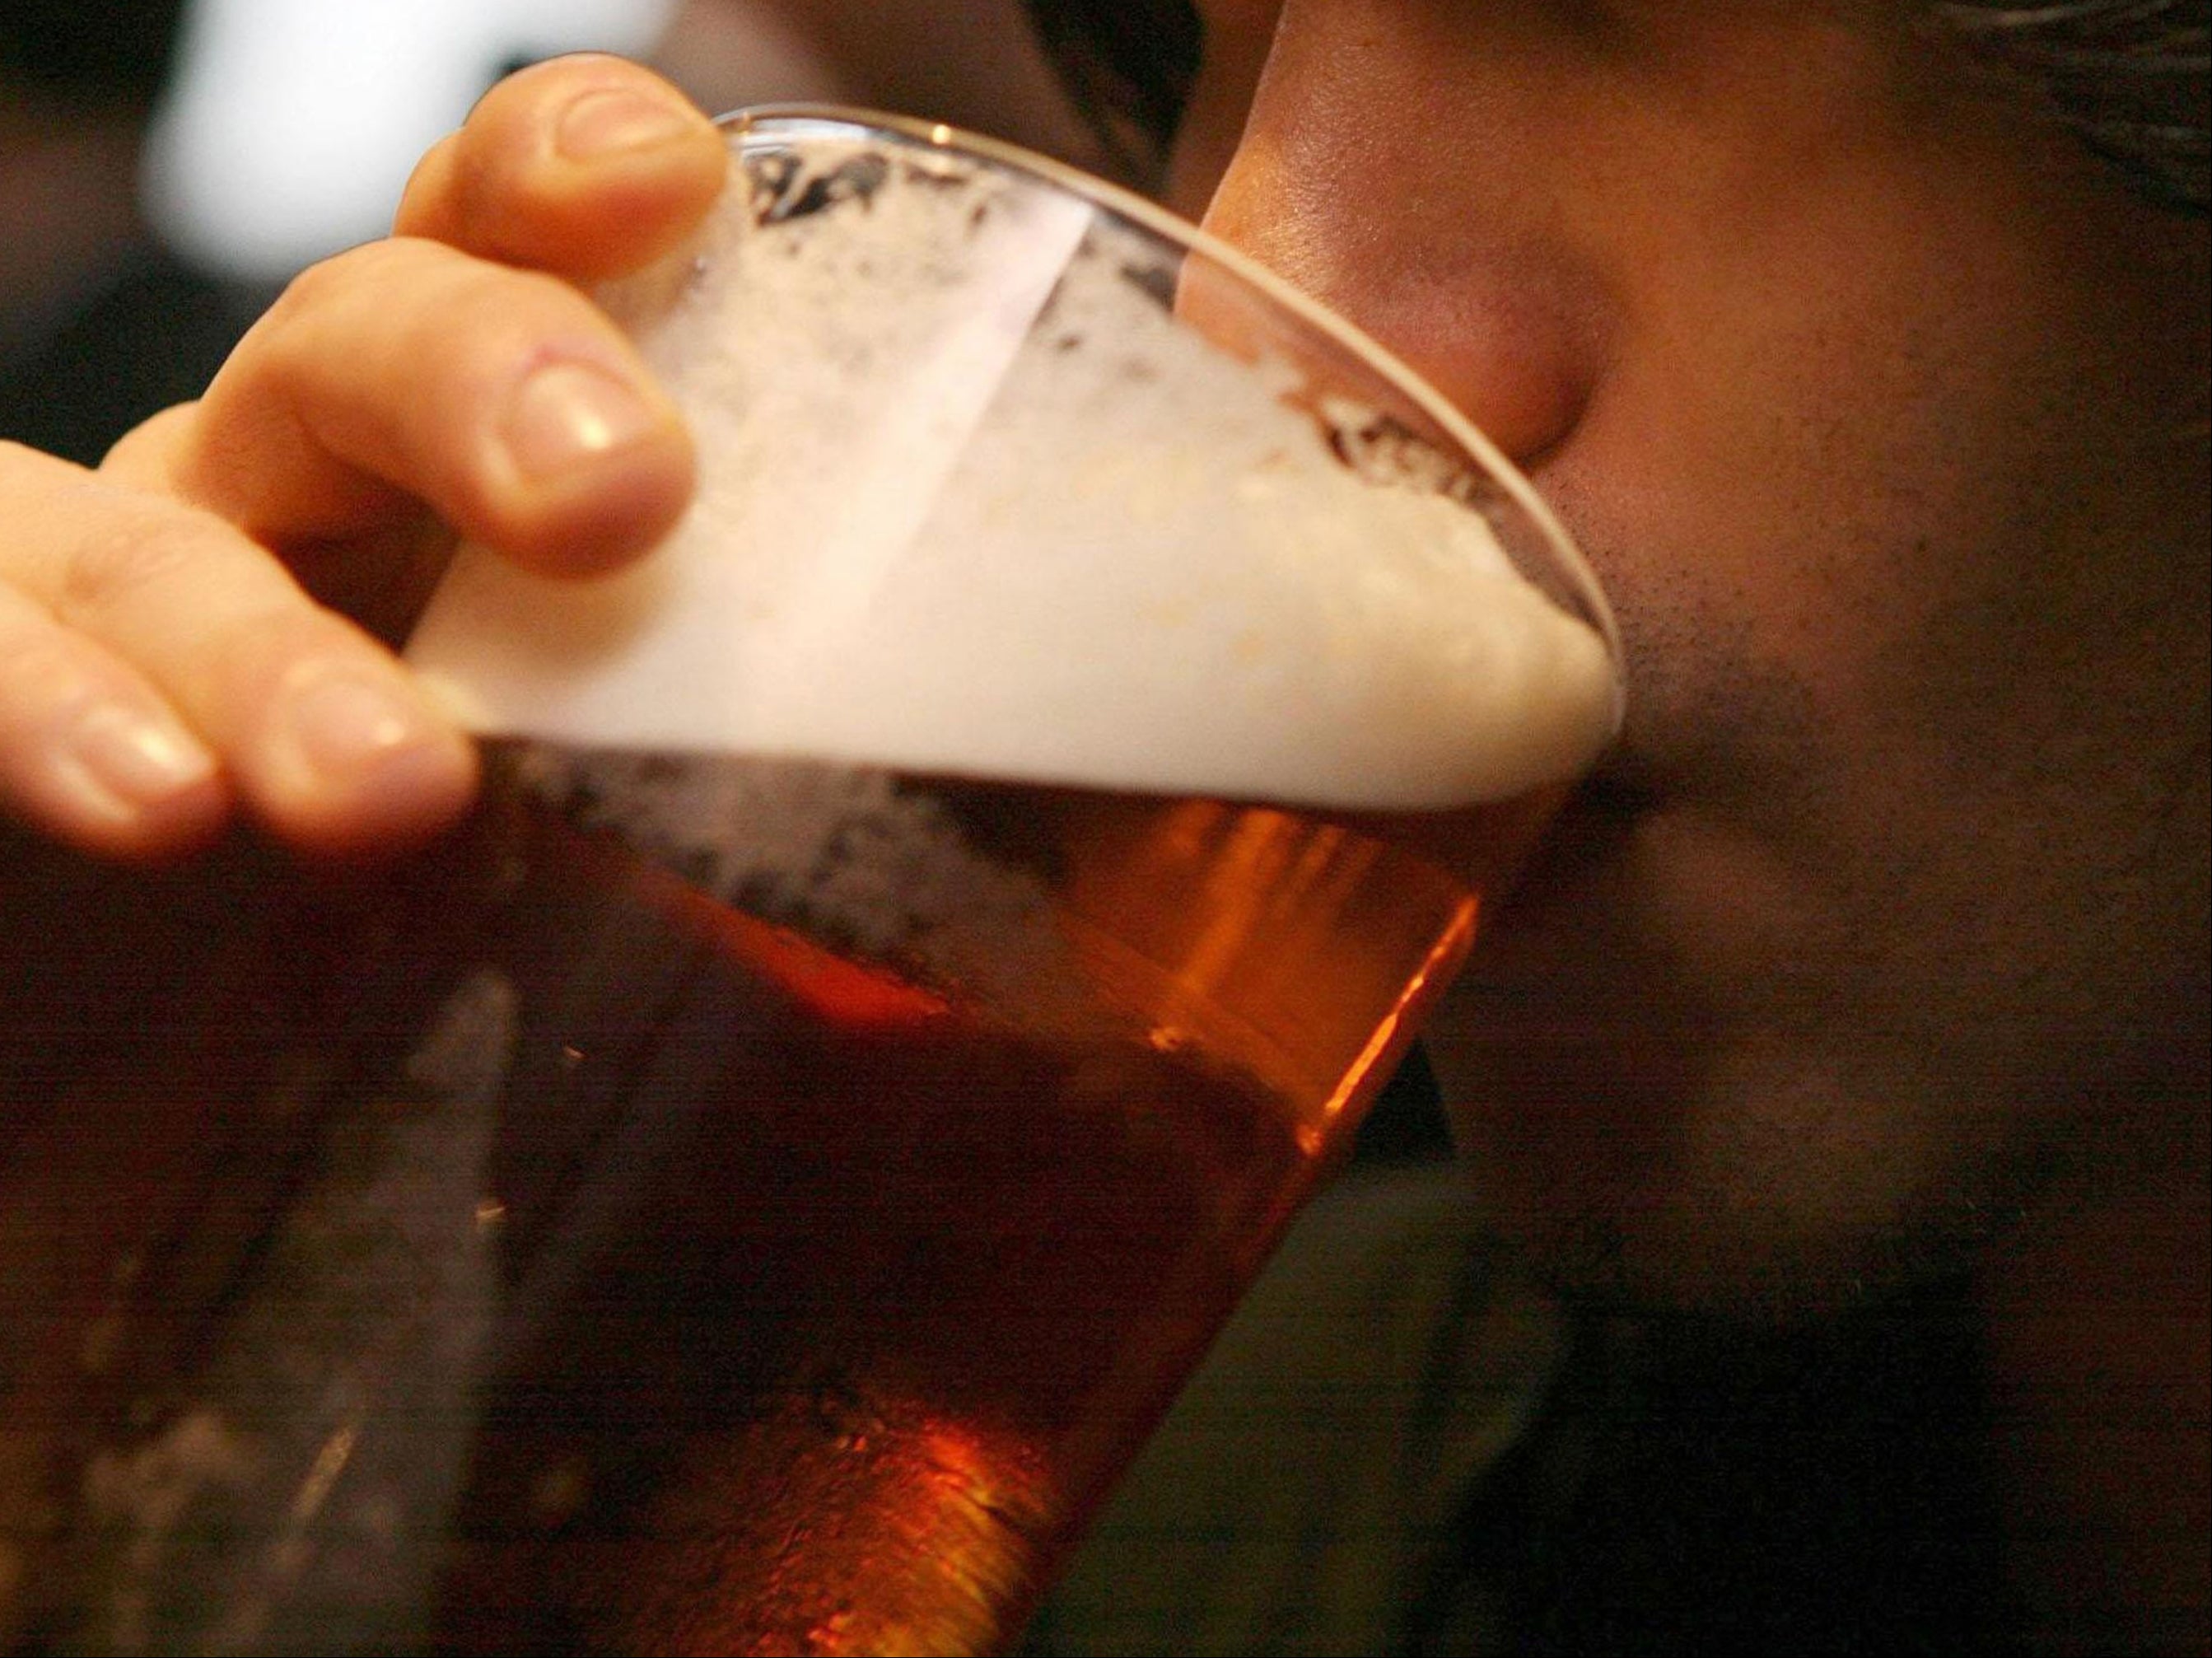 Dry January sees people go without alcohol for the month